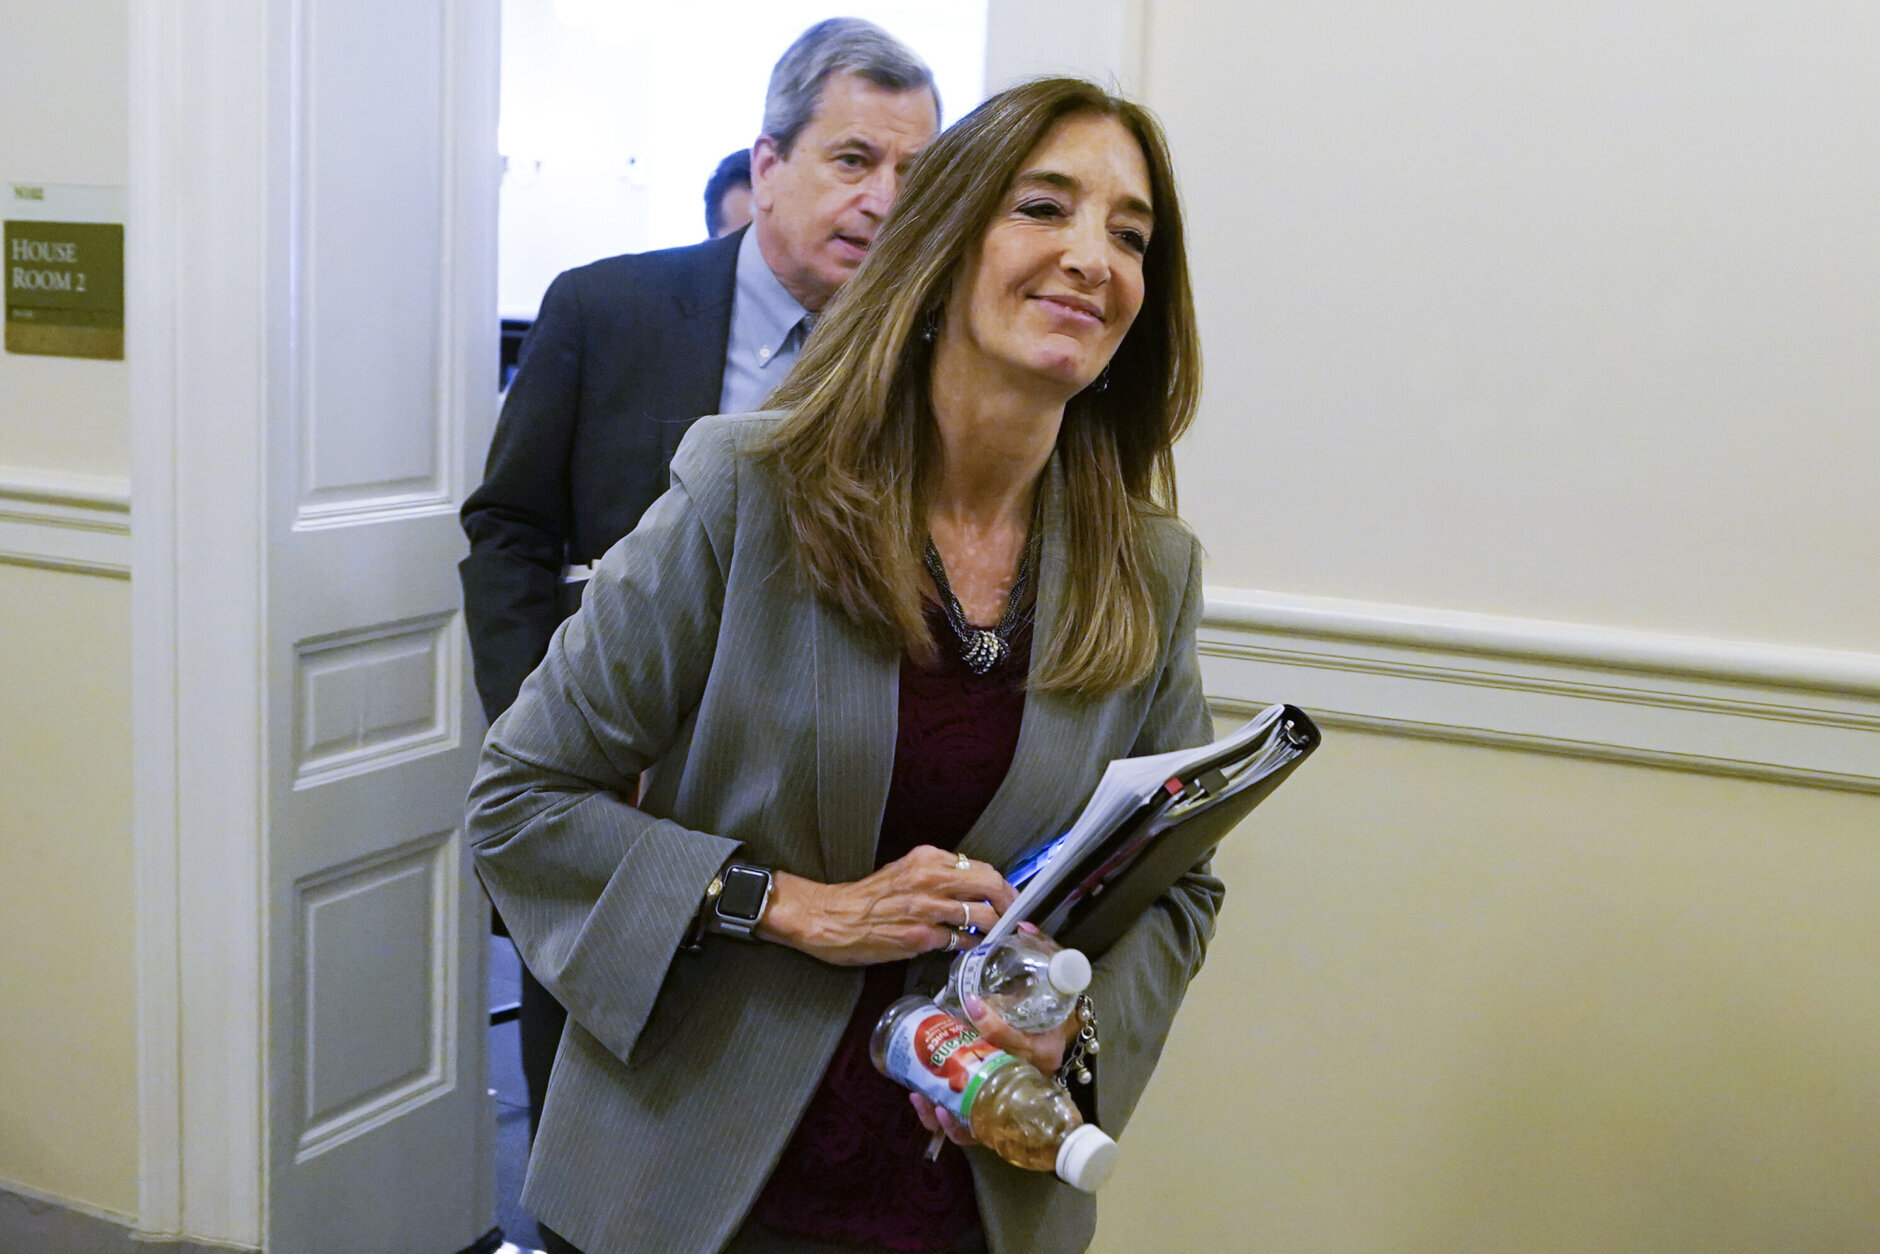 FILE - Former House minority leader Del. Eileen Filler-Corn, D-Fairfax, leaves the Virginia Democratic Legislative Caucus at the Capitol on April 27, 2022, in Richmond, Va. Former House speaker Filler-Corn and Democratic Sen. Lynwood Lewis announced Tuesday, March 7, 2023, plans to step down after their current terms end, joining the flurry of lawmakers retiring rather than seeking re-election this year under new maps. (AP Photo/Steve Helber, File)